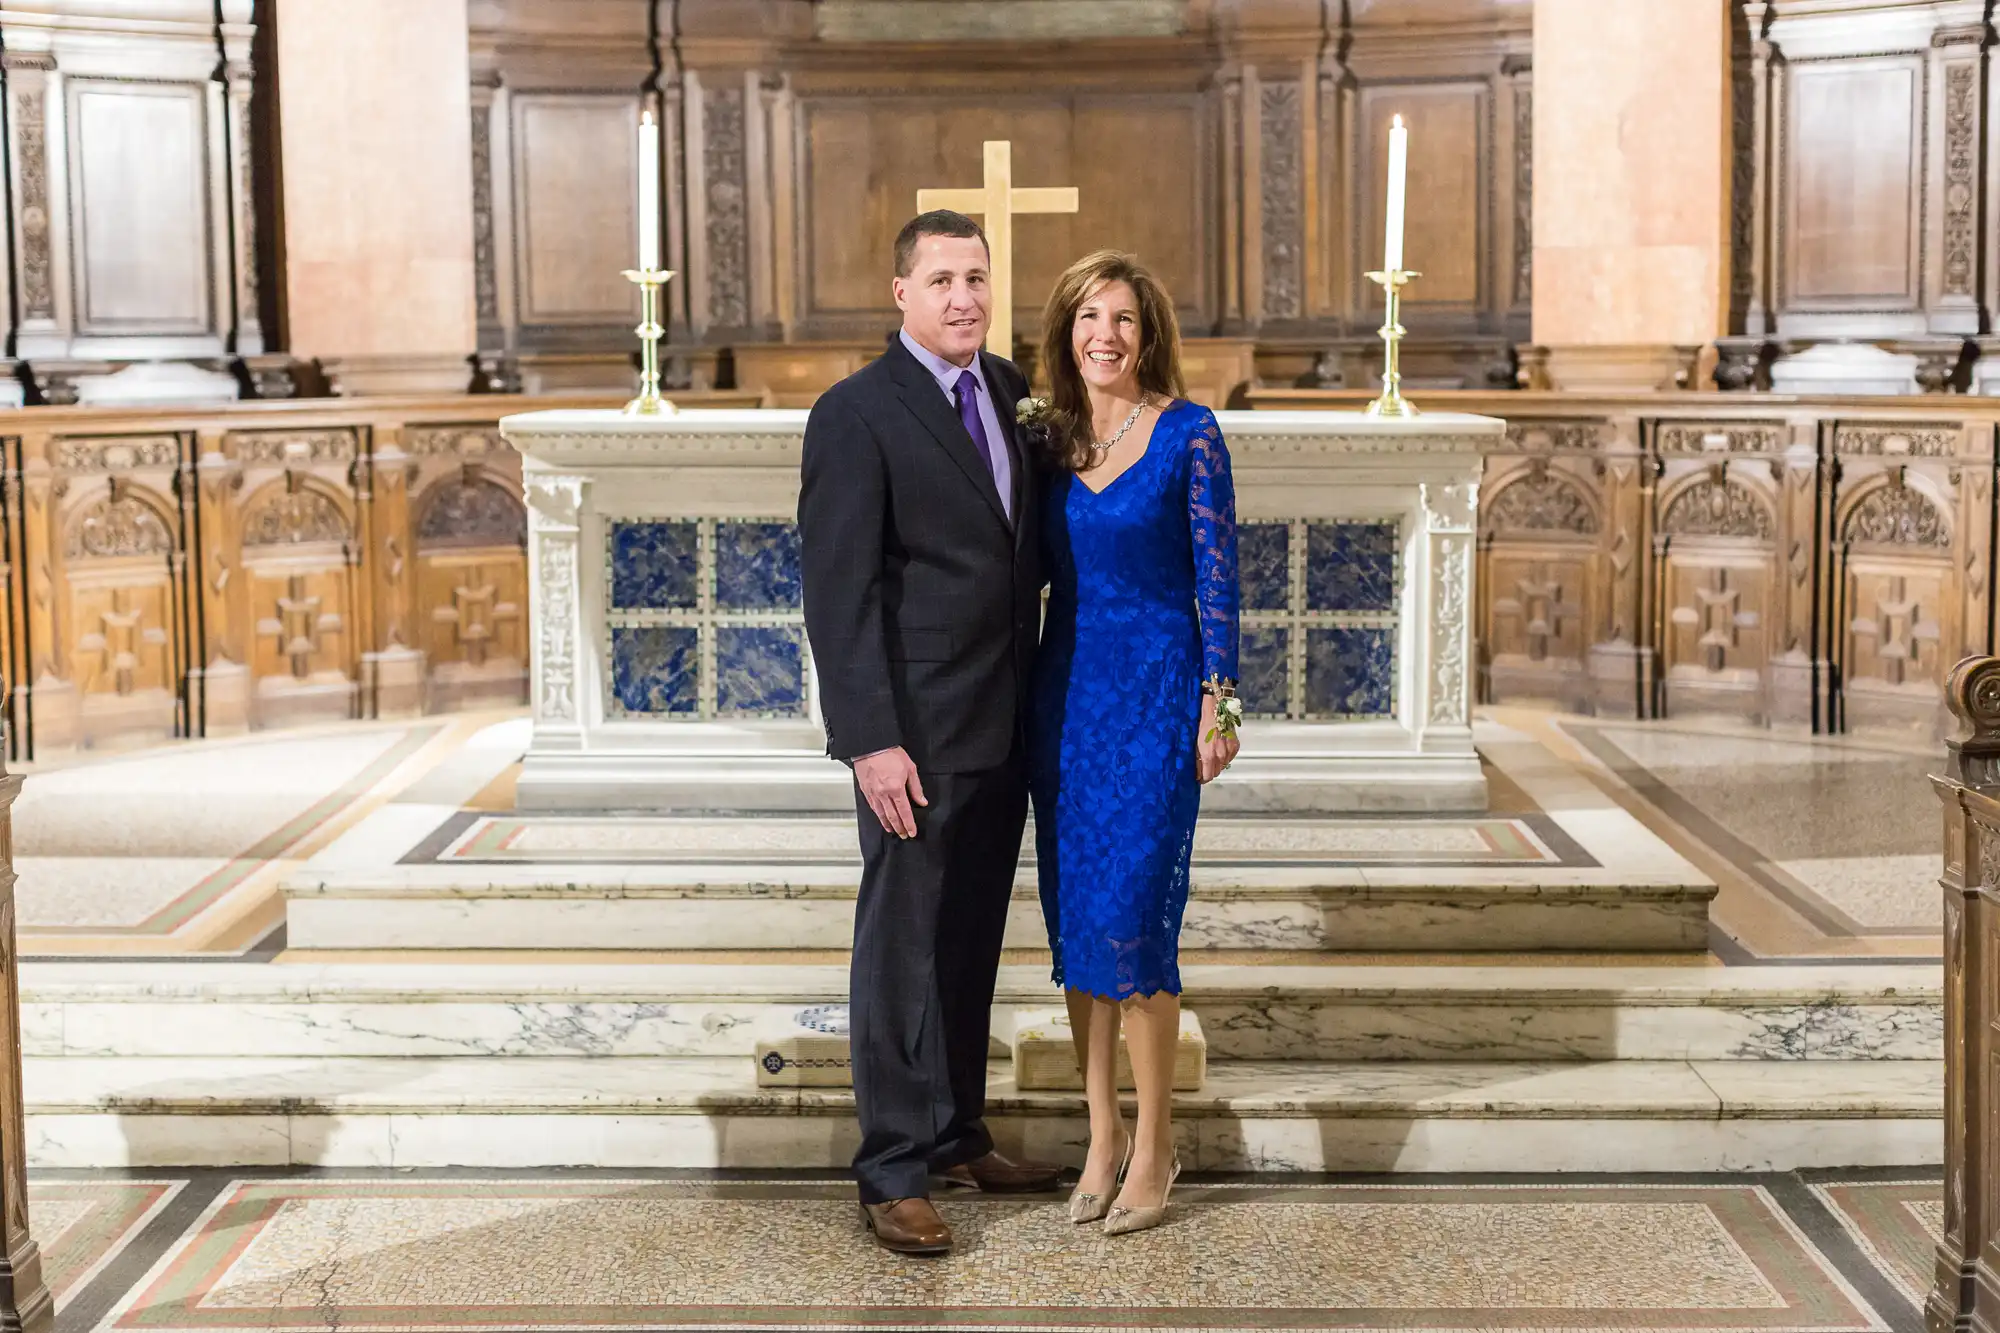 Man and woman in formal attire smiling in a church, standing in front of an altar with lit candles.